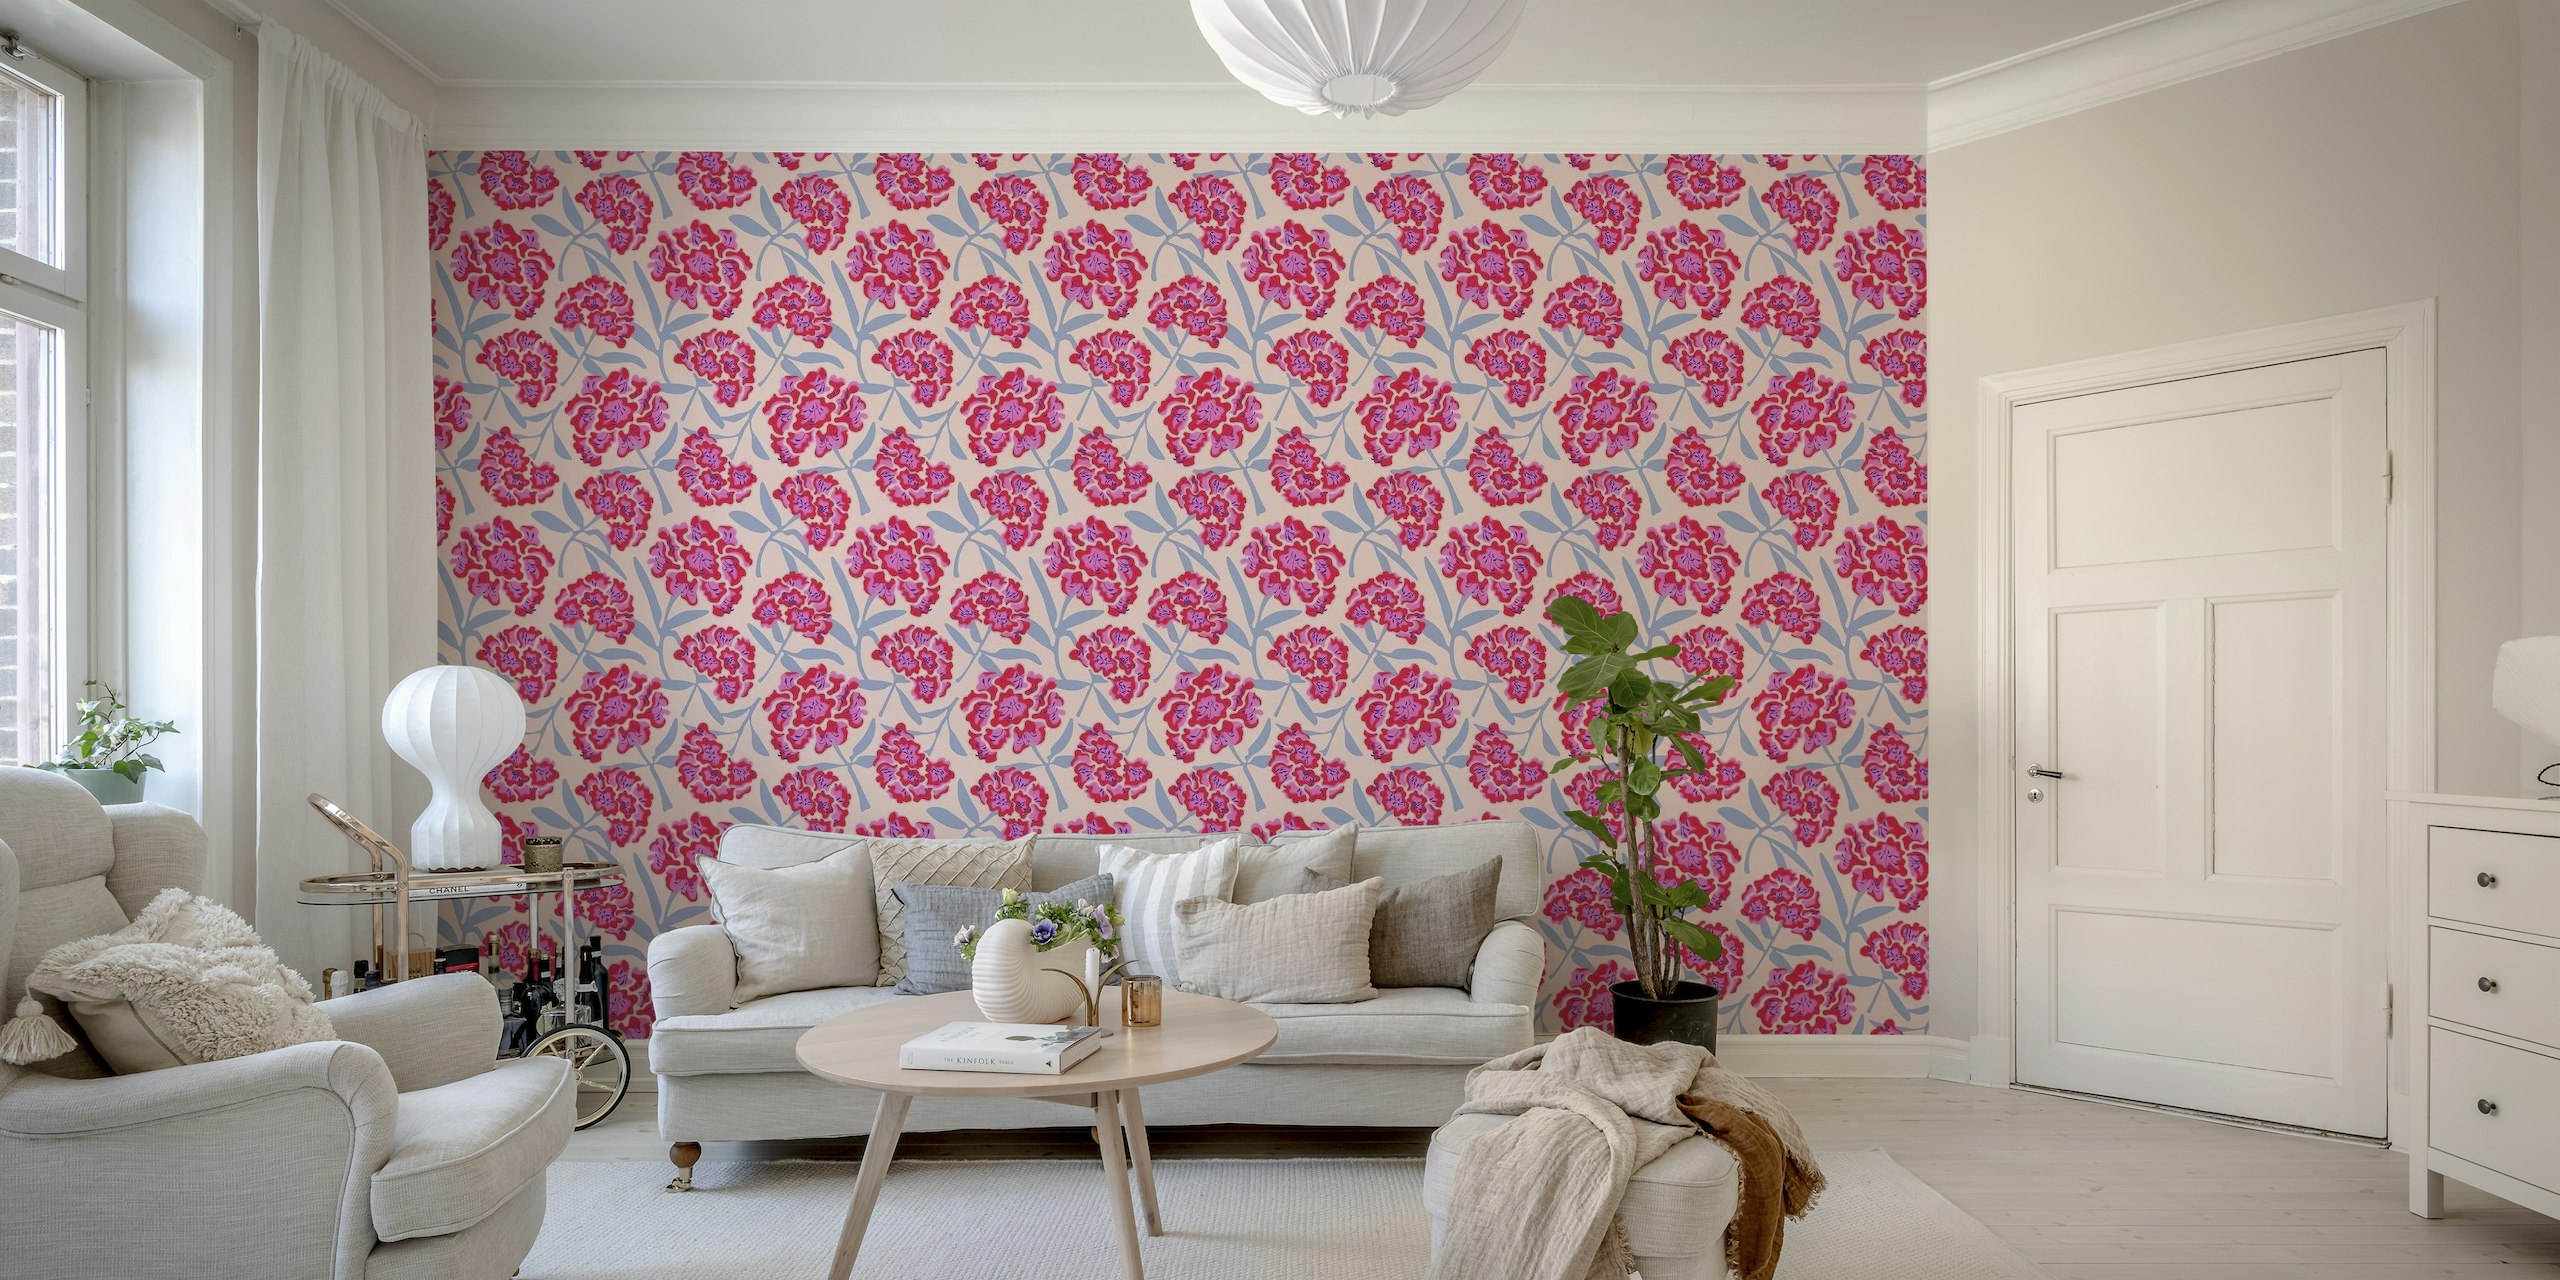 RHODODENDRONS Floral - Fuchsia Pink - Large papel pintado